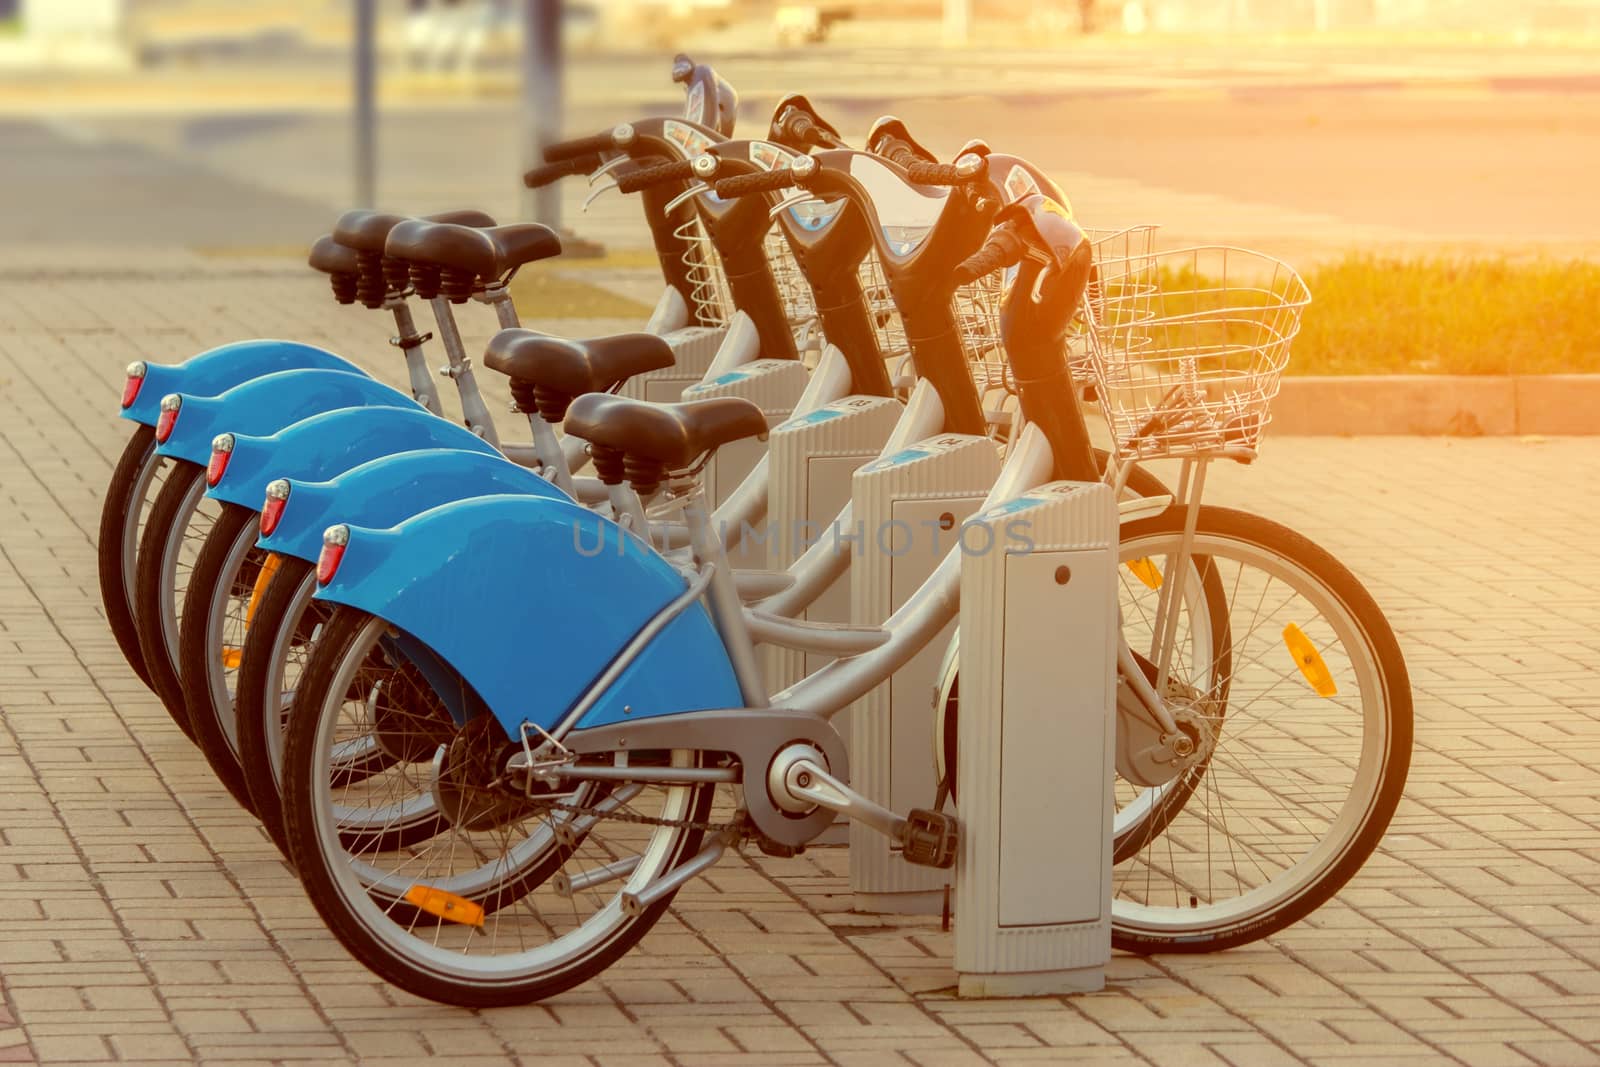 The bicycles are type of ecological and sporty public transport in Kazan, Russia